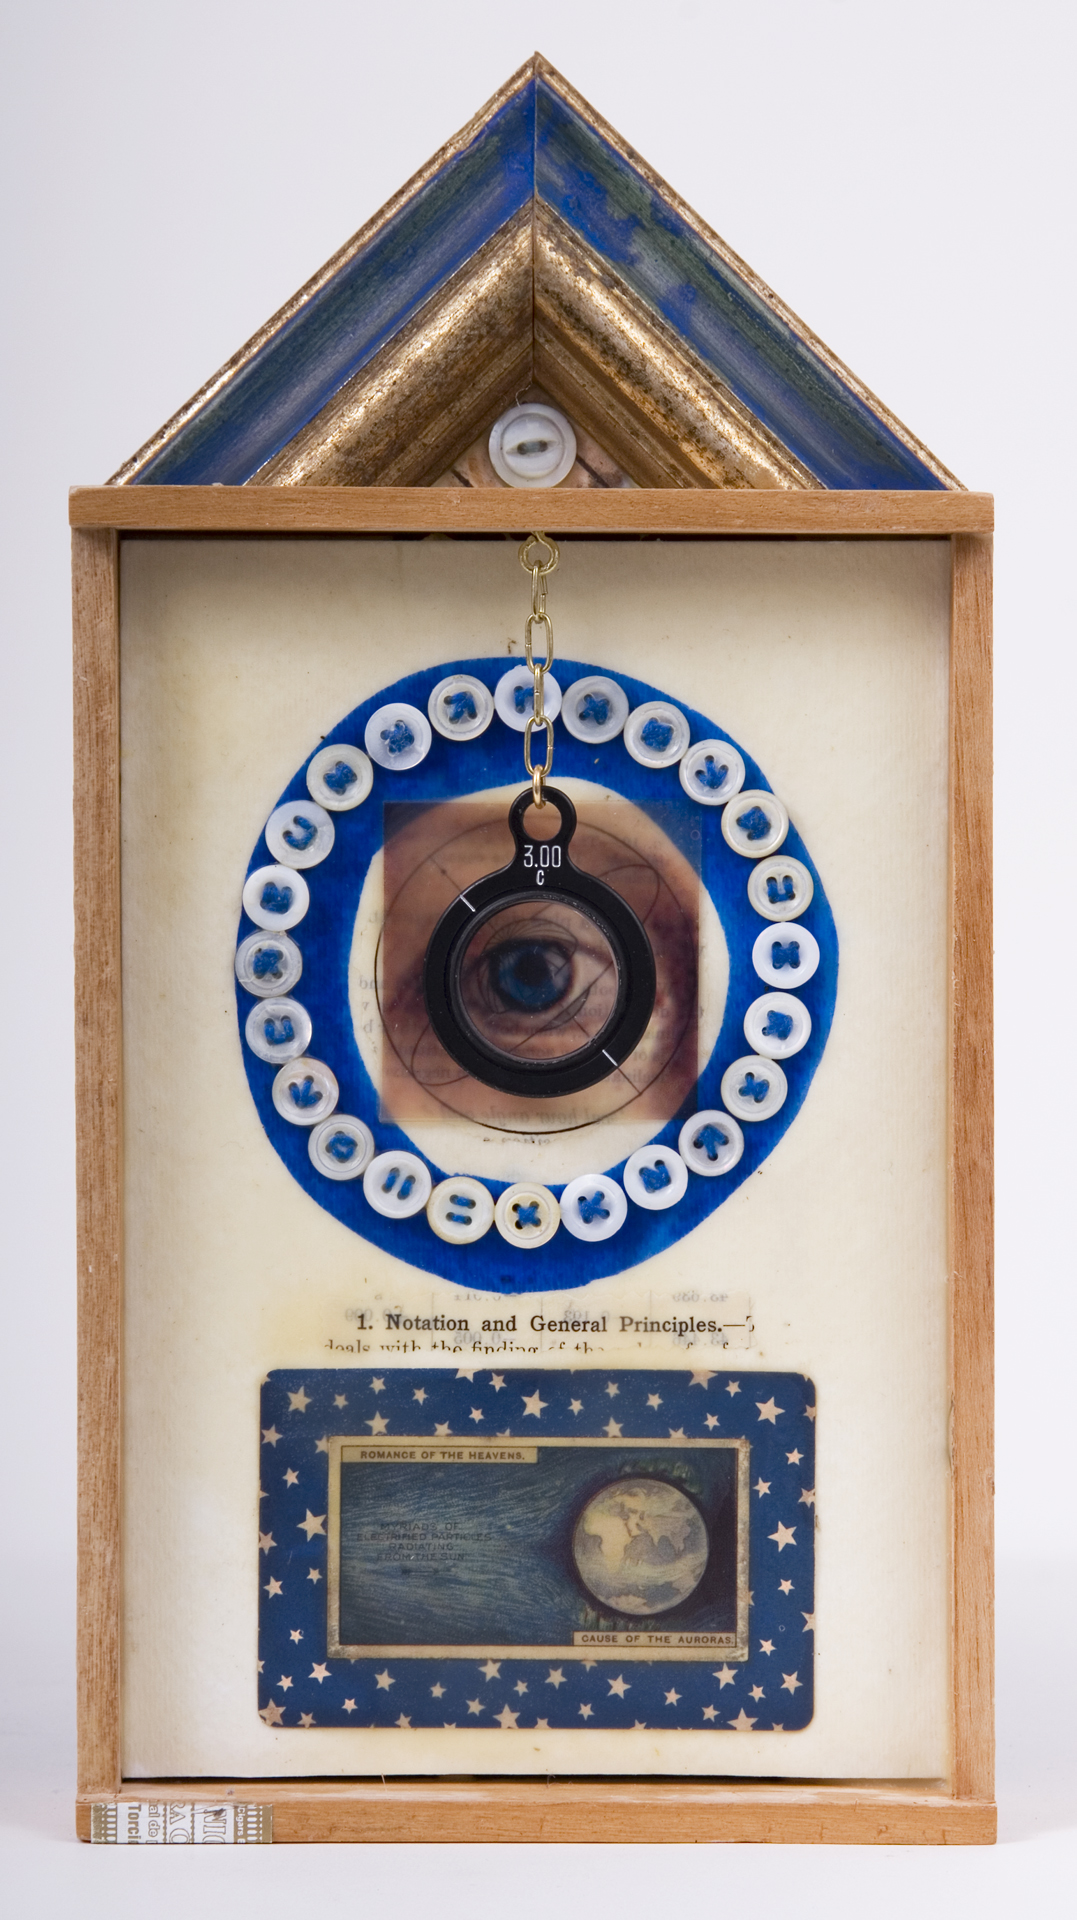     \"1. Notation and General Principles\"
    mixed-media assemblage
    11.25 x 5.75 x 2
    2009
    SOLD
    Cigar box, frame sample, birch bark, mother of pearl buttons, fortune & tobac cards, transparency, optical lens, ink, wax, astronomy text on watercolor paper